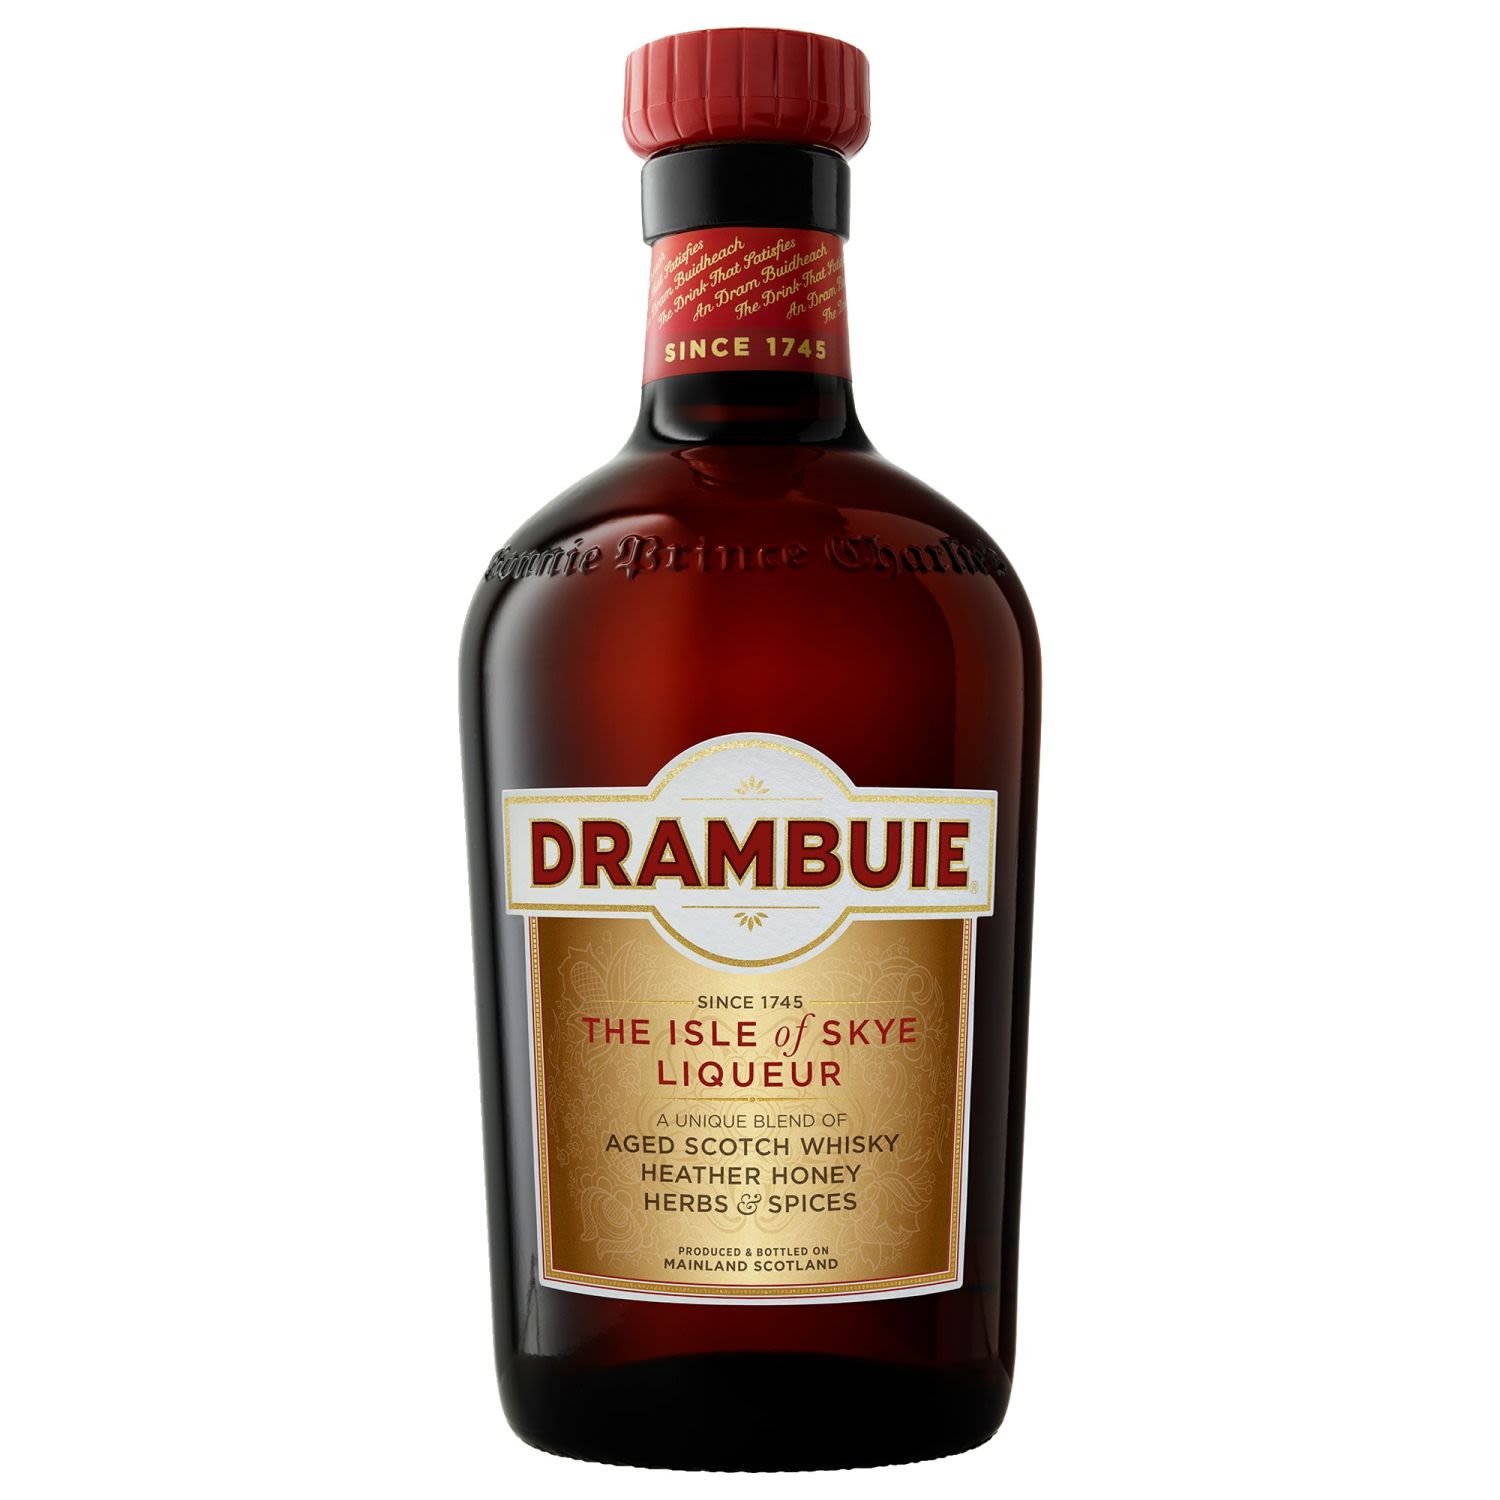 Drambuie's unique blend of aged scotch whisky infused into a secret selection of spices and heather honey is a staple ingredient used by bartenders worldwide. A unique Highland spirit, exquisite in taste and deliciously potent. The name Drambuie is derived from Scots Gaelic, An Dram Buidheach and means +The Drink that Satisfies+.<br /> <br />Alcohol Volume: 40.00%<br /><br />Pack Format: Bottle<br /><br />Standard Drinks: 22<br /><br />Pack Type: Bottle<br /><br />Country of Origin: Scotland<br />